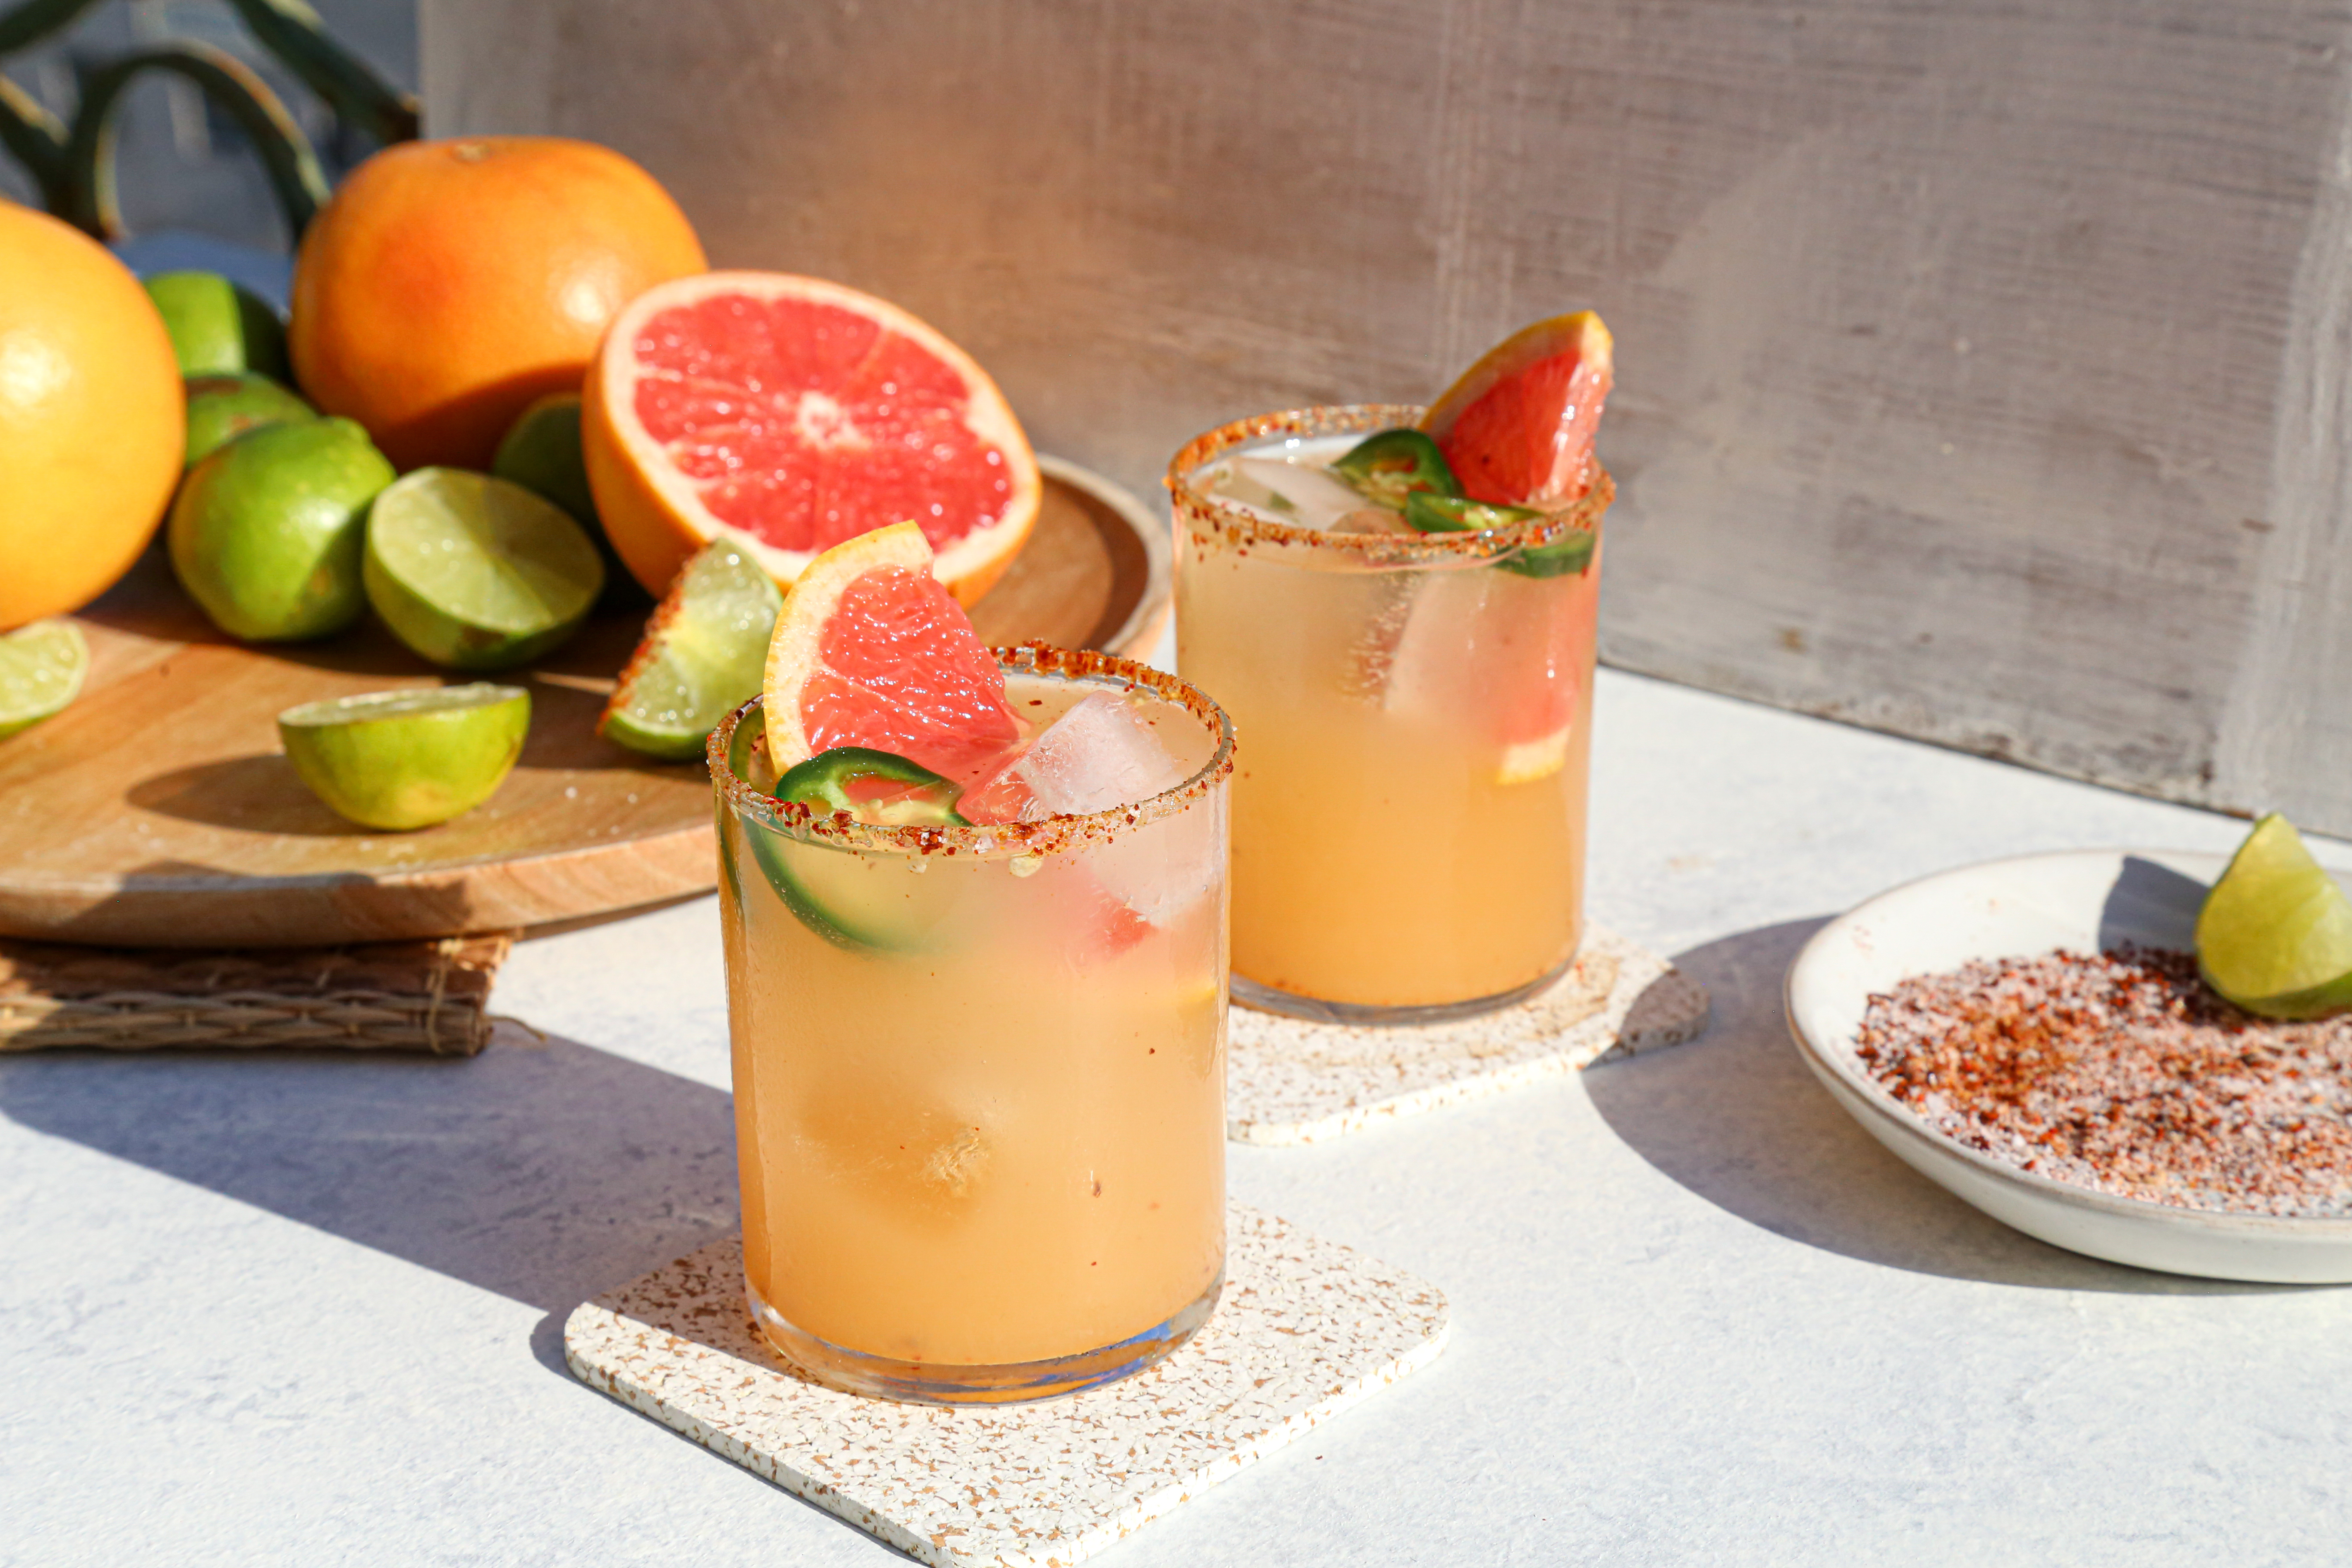 Spicy Paloma Cocktail